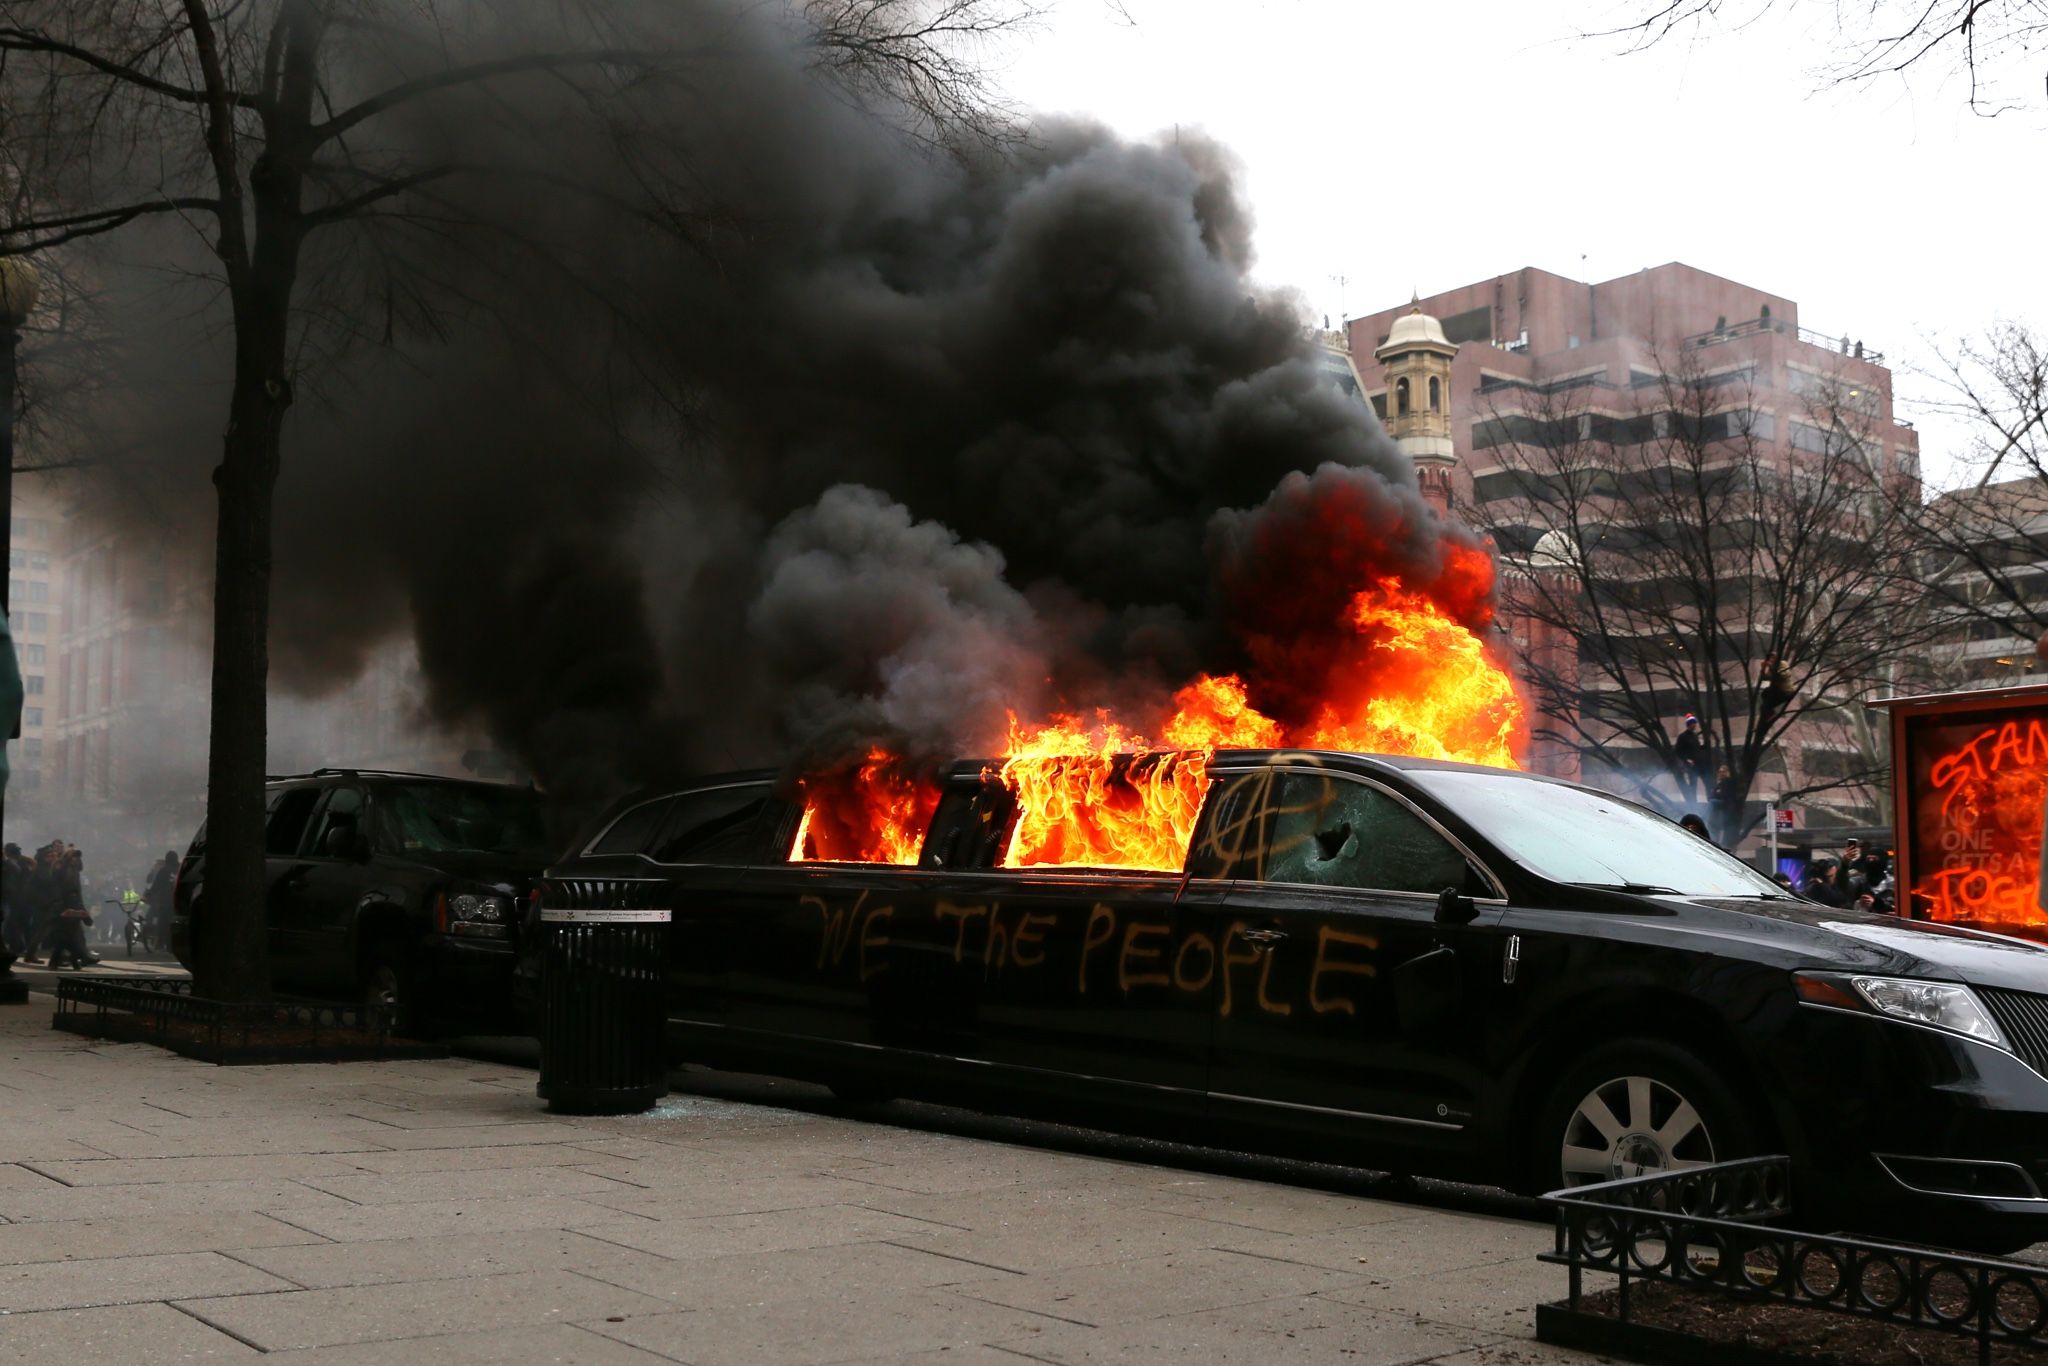 PHOTO: Protesters set fire to a limousine in the street, Jan. 20, 2017, in Washington.